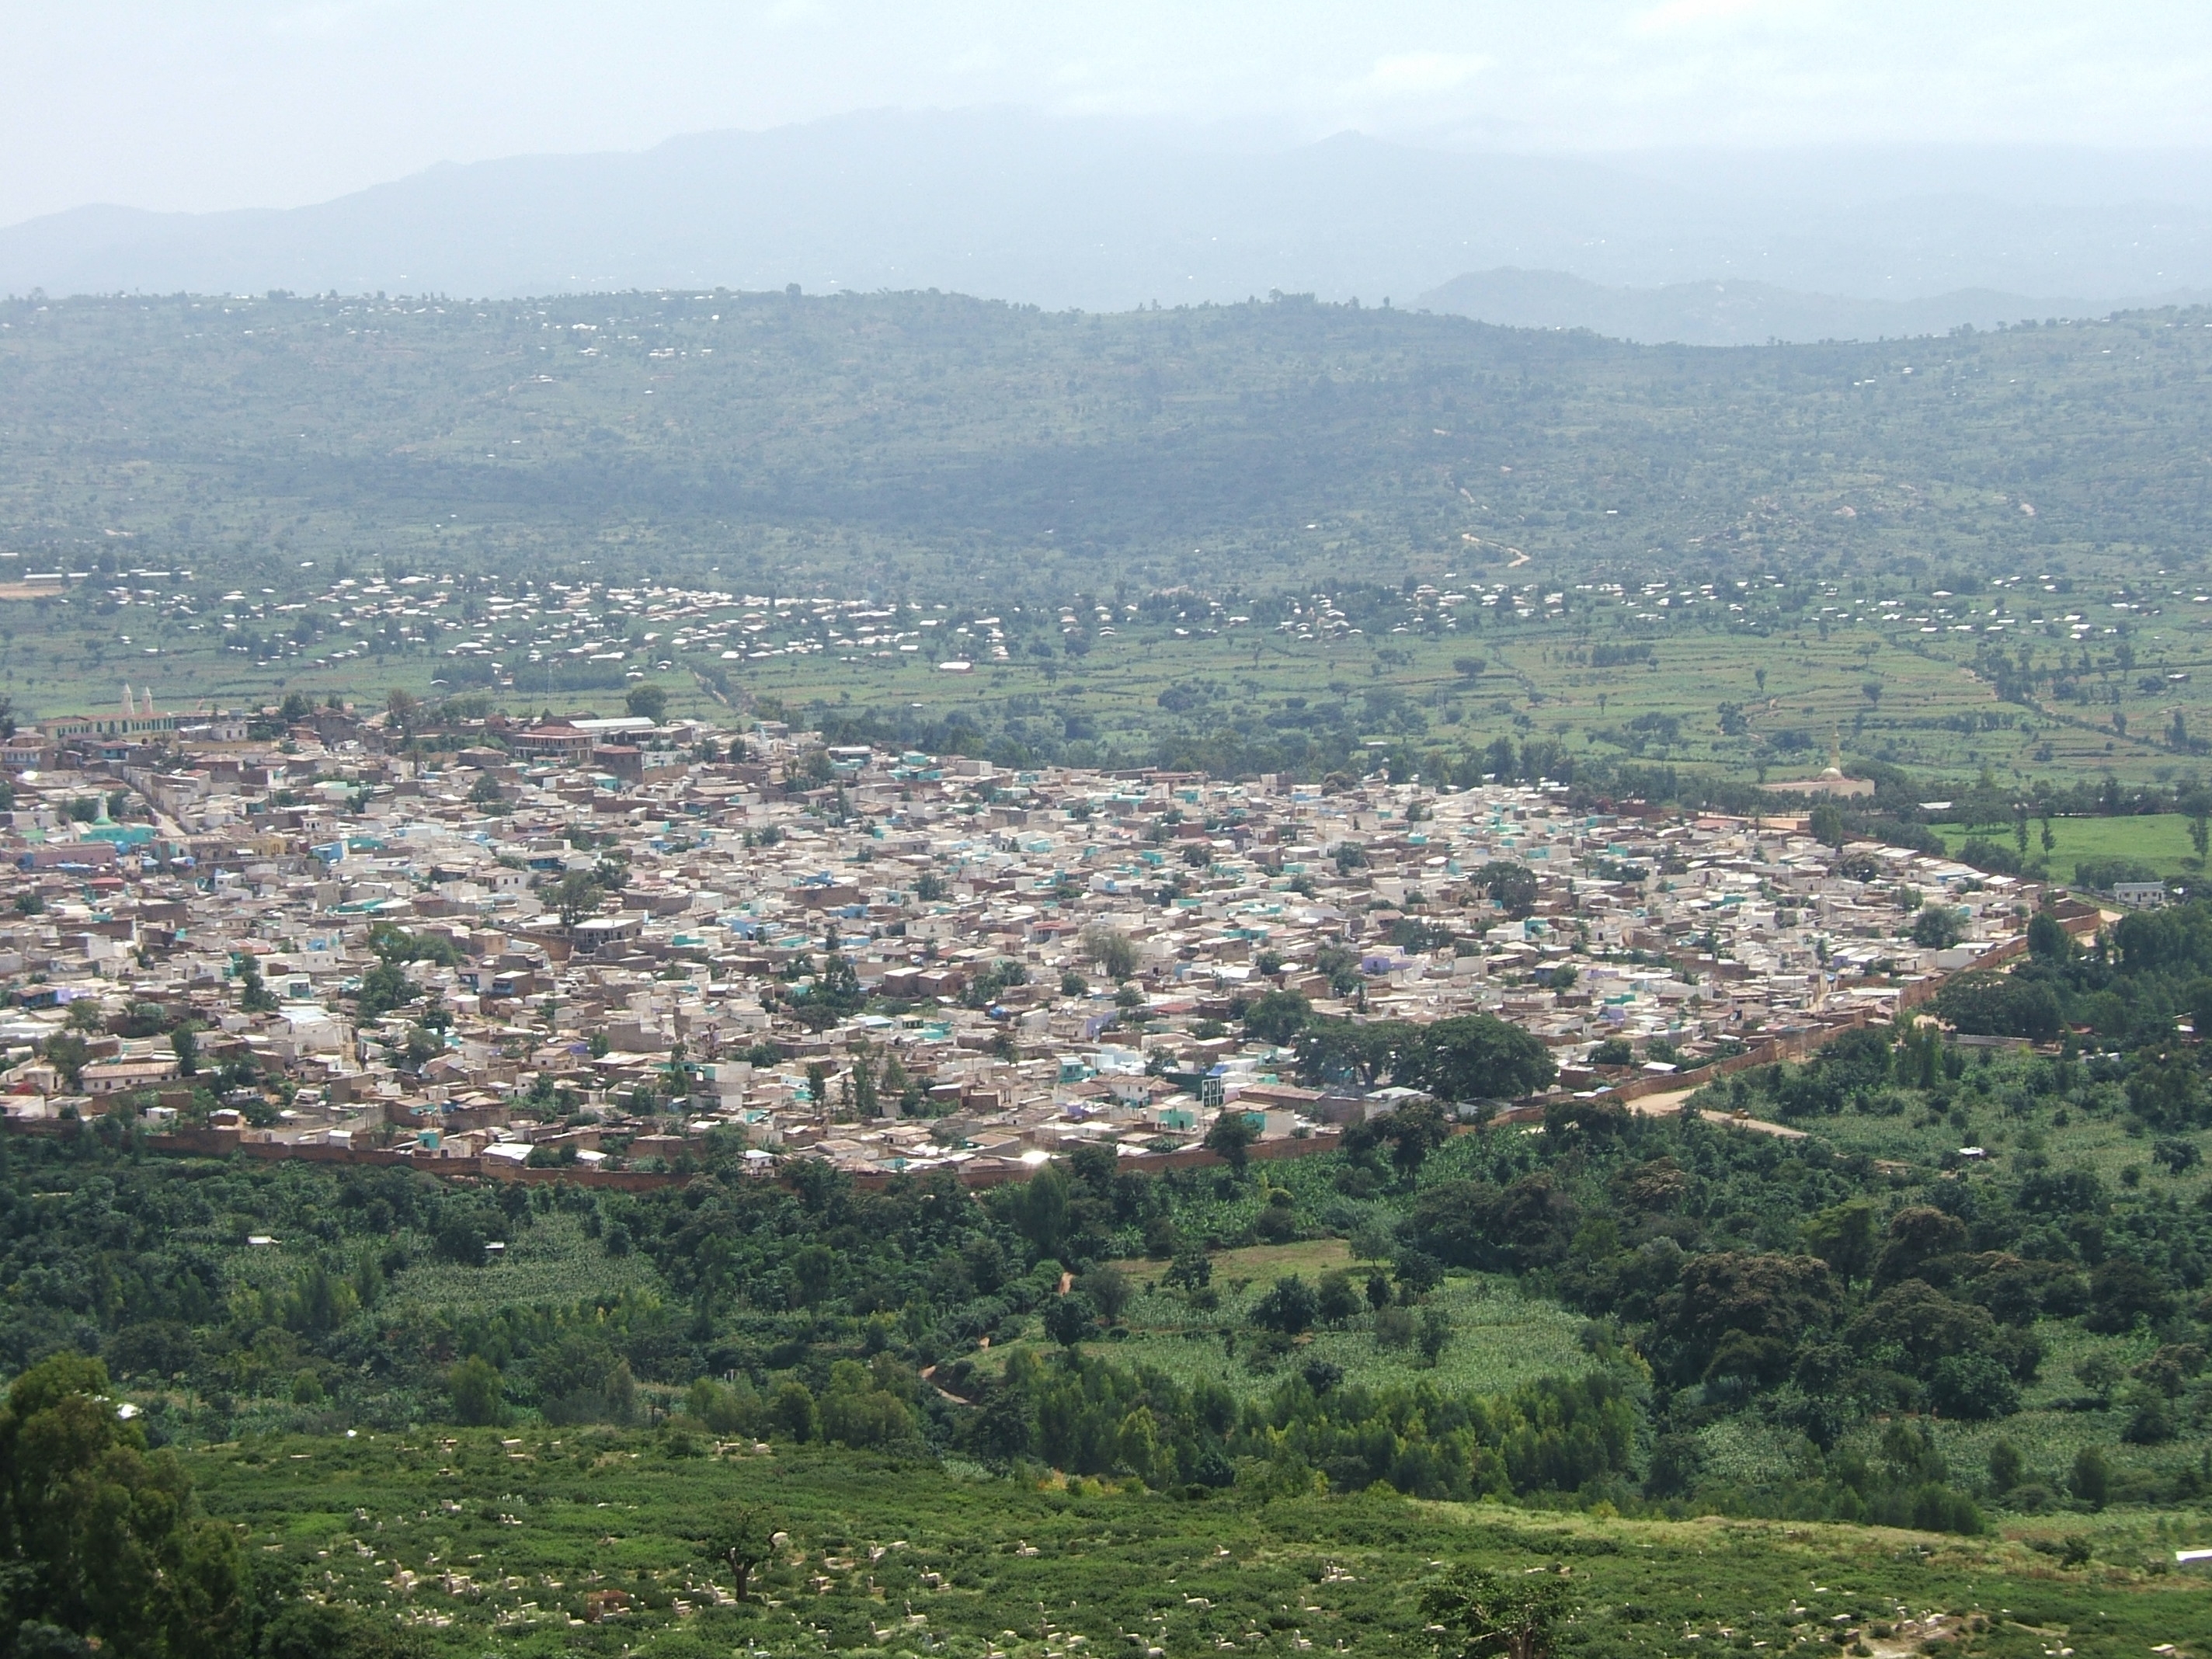 Town_of_Harar_with_Citywall.jpg